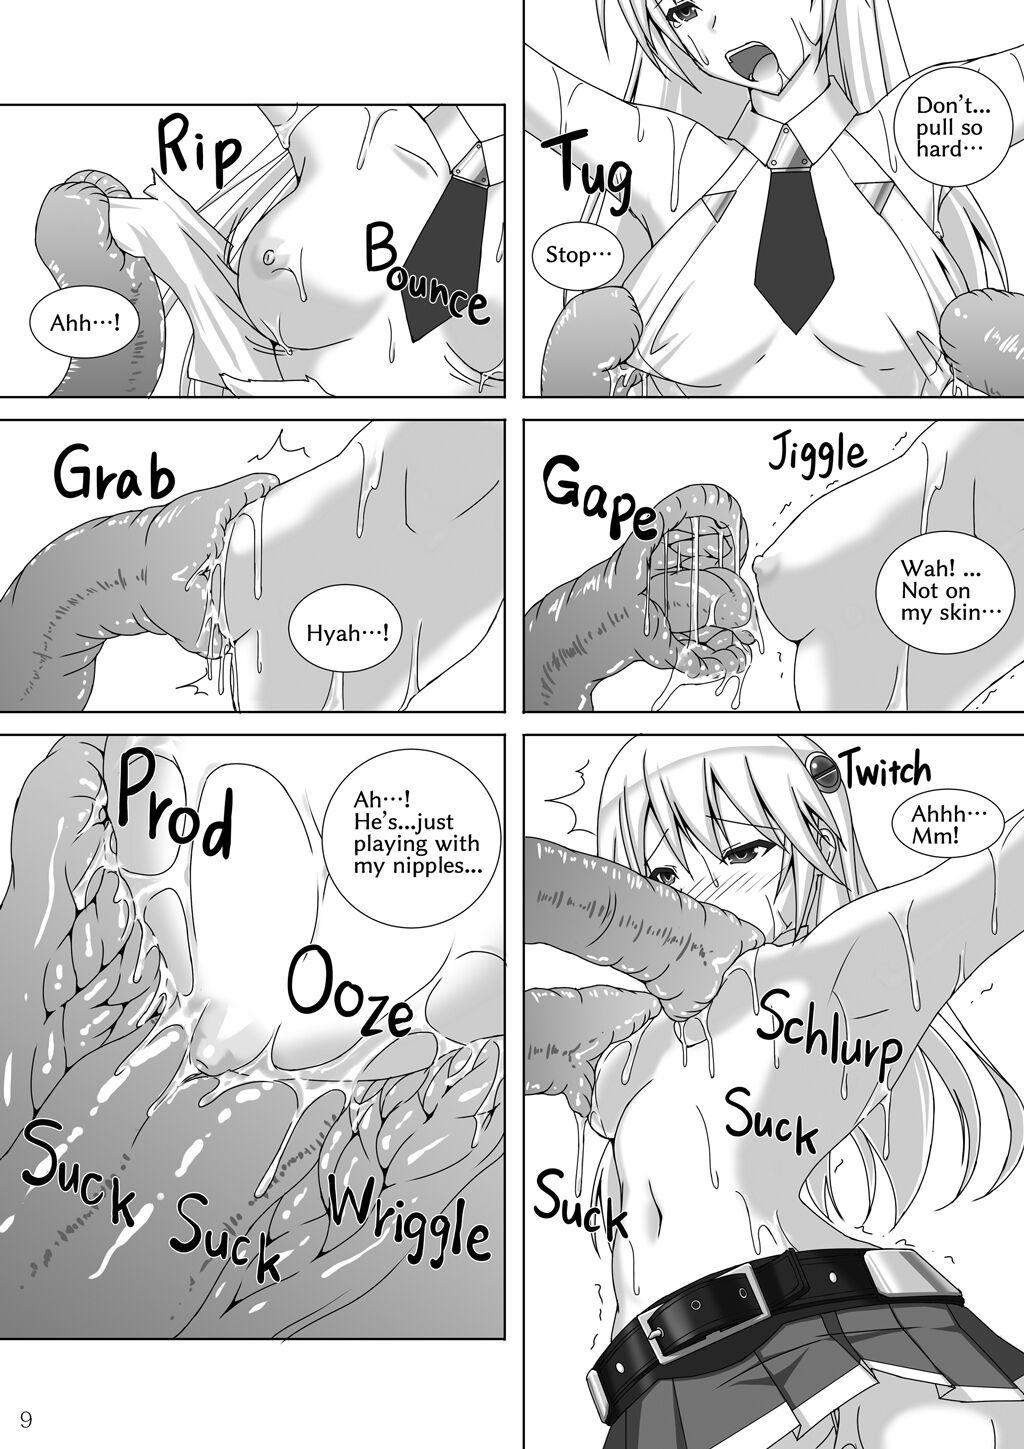 Licking Pussy Noel Doesn't hate Arakune Anymore! 3 - Blazblue Tight - Page 10